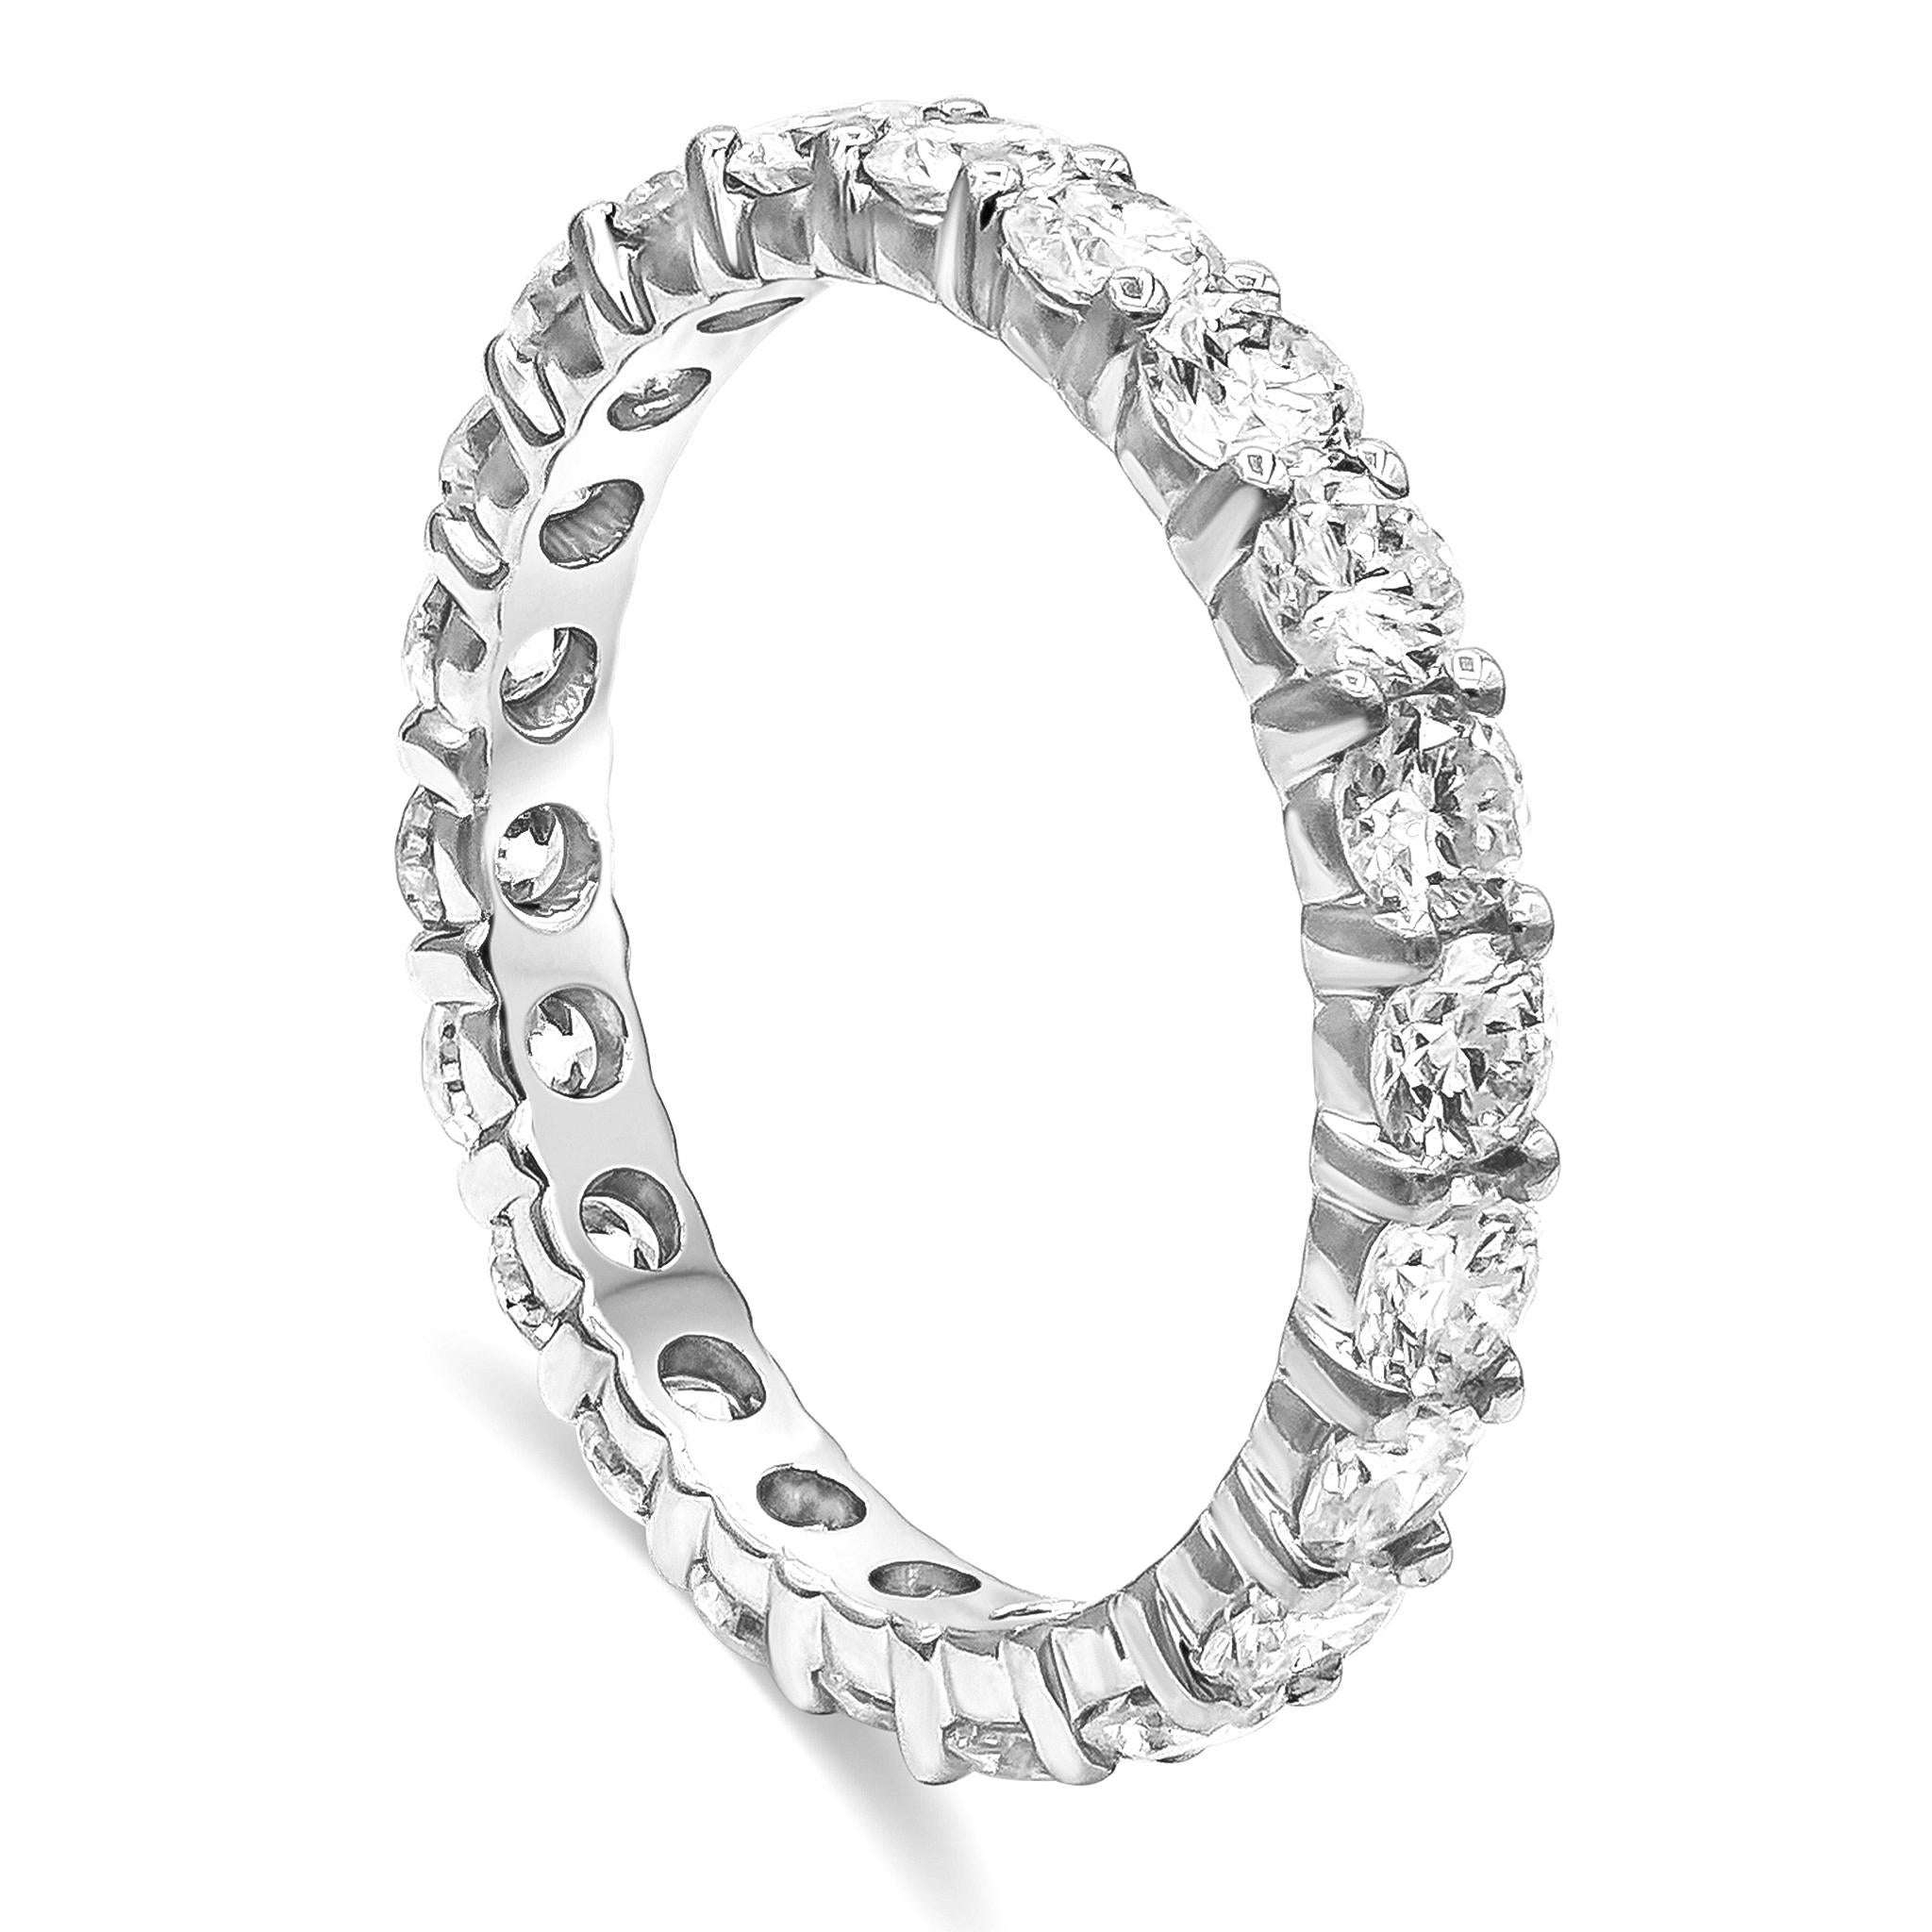 A classic eternity wedding band style showcasing a row of round brilliant diamonds weighing 1.92 carats total, G-H color and VS clarity. Set in 18K white gold. Size 6 US.

Roman Malakov is a custom house, specializing in creating anything you can